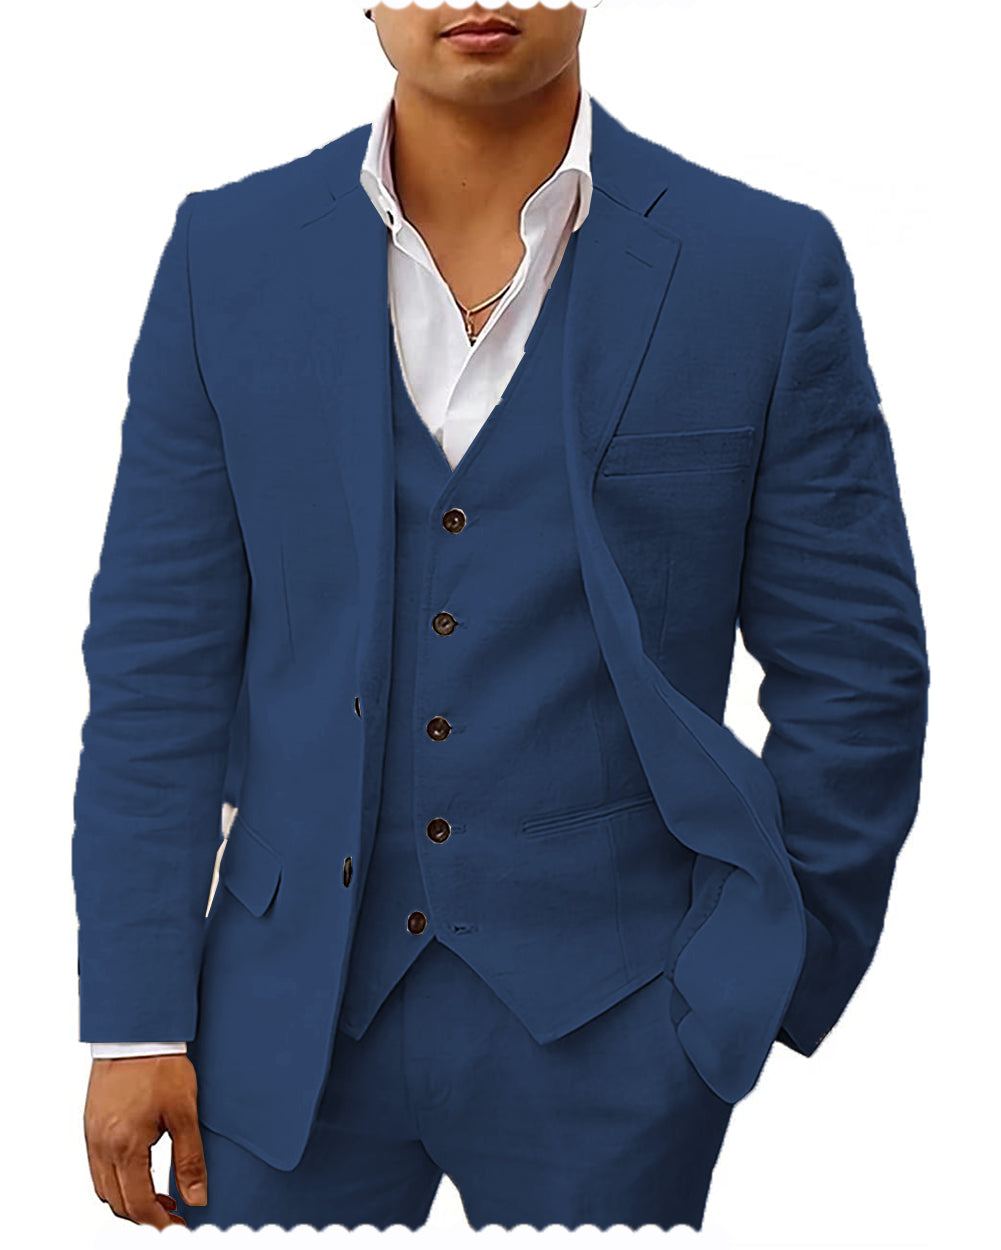 How to Wear a Blue Tuxedo — 5 Simple Rules  Blue tuxedos, Blue tuxedo  jacket, Navy blue tuxedos